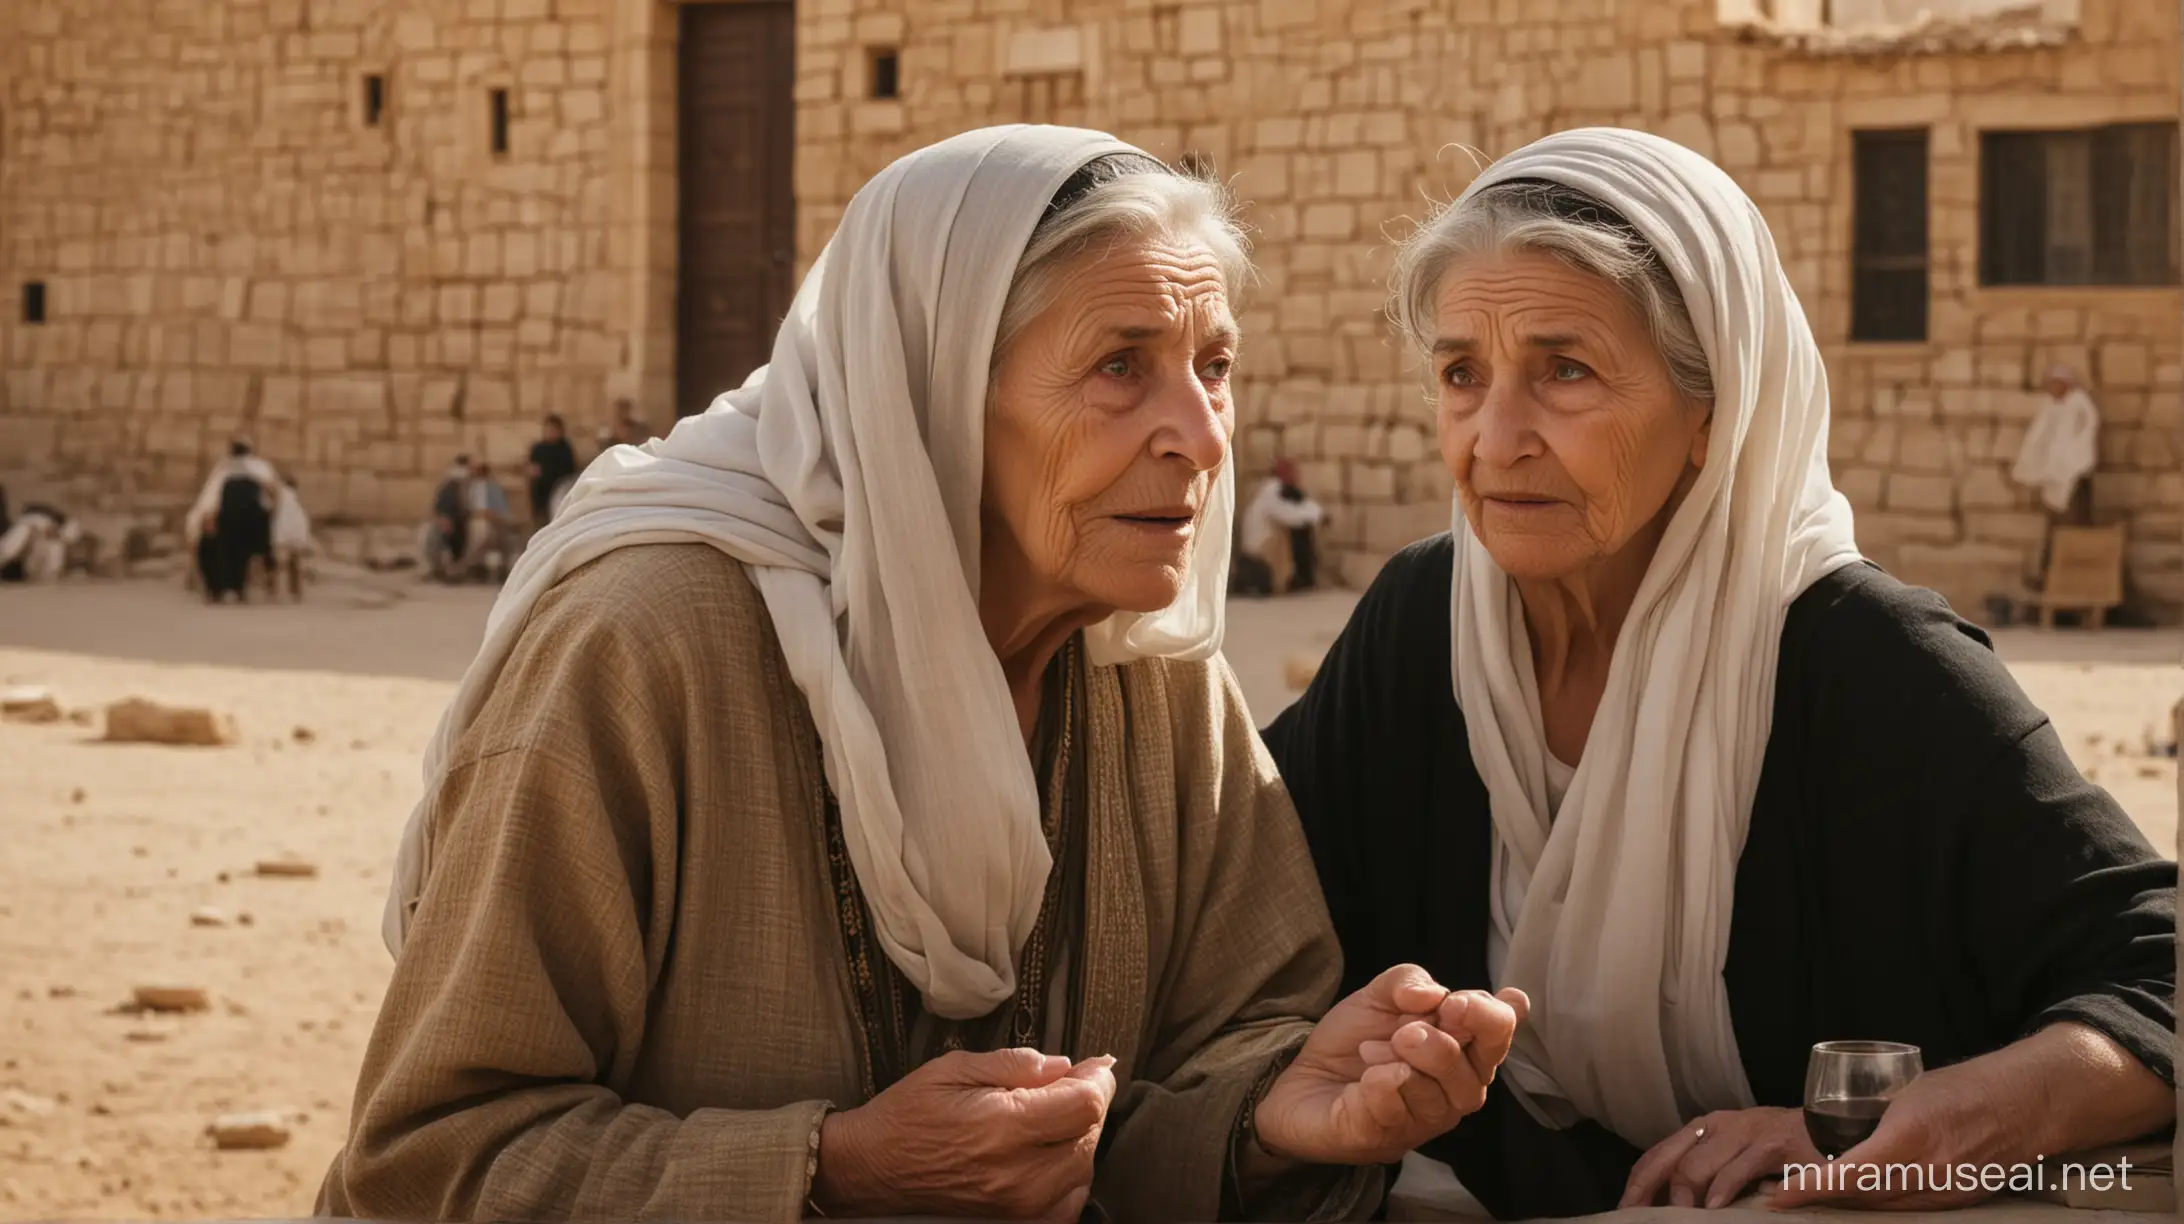 In the foreground, an old woman talking to a young man . set in the Middle East during the era of the Biblical Abraham.